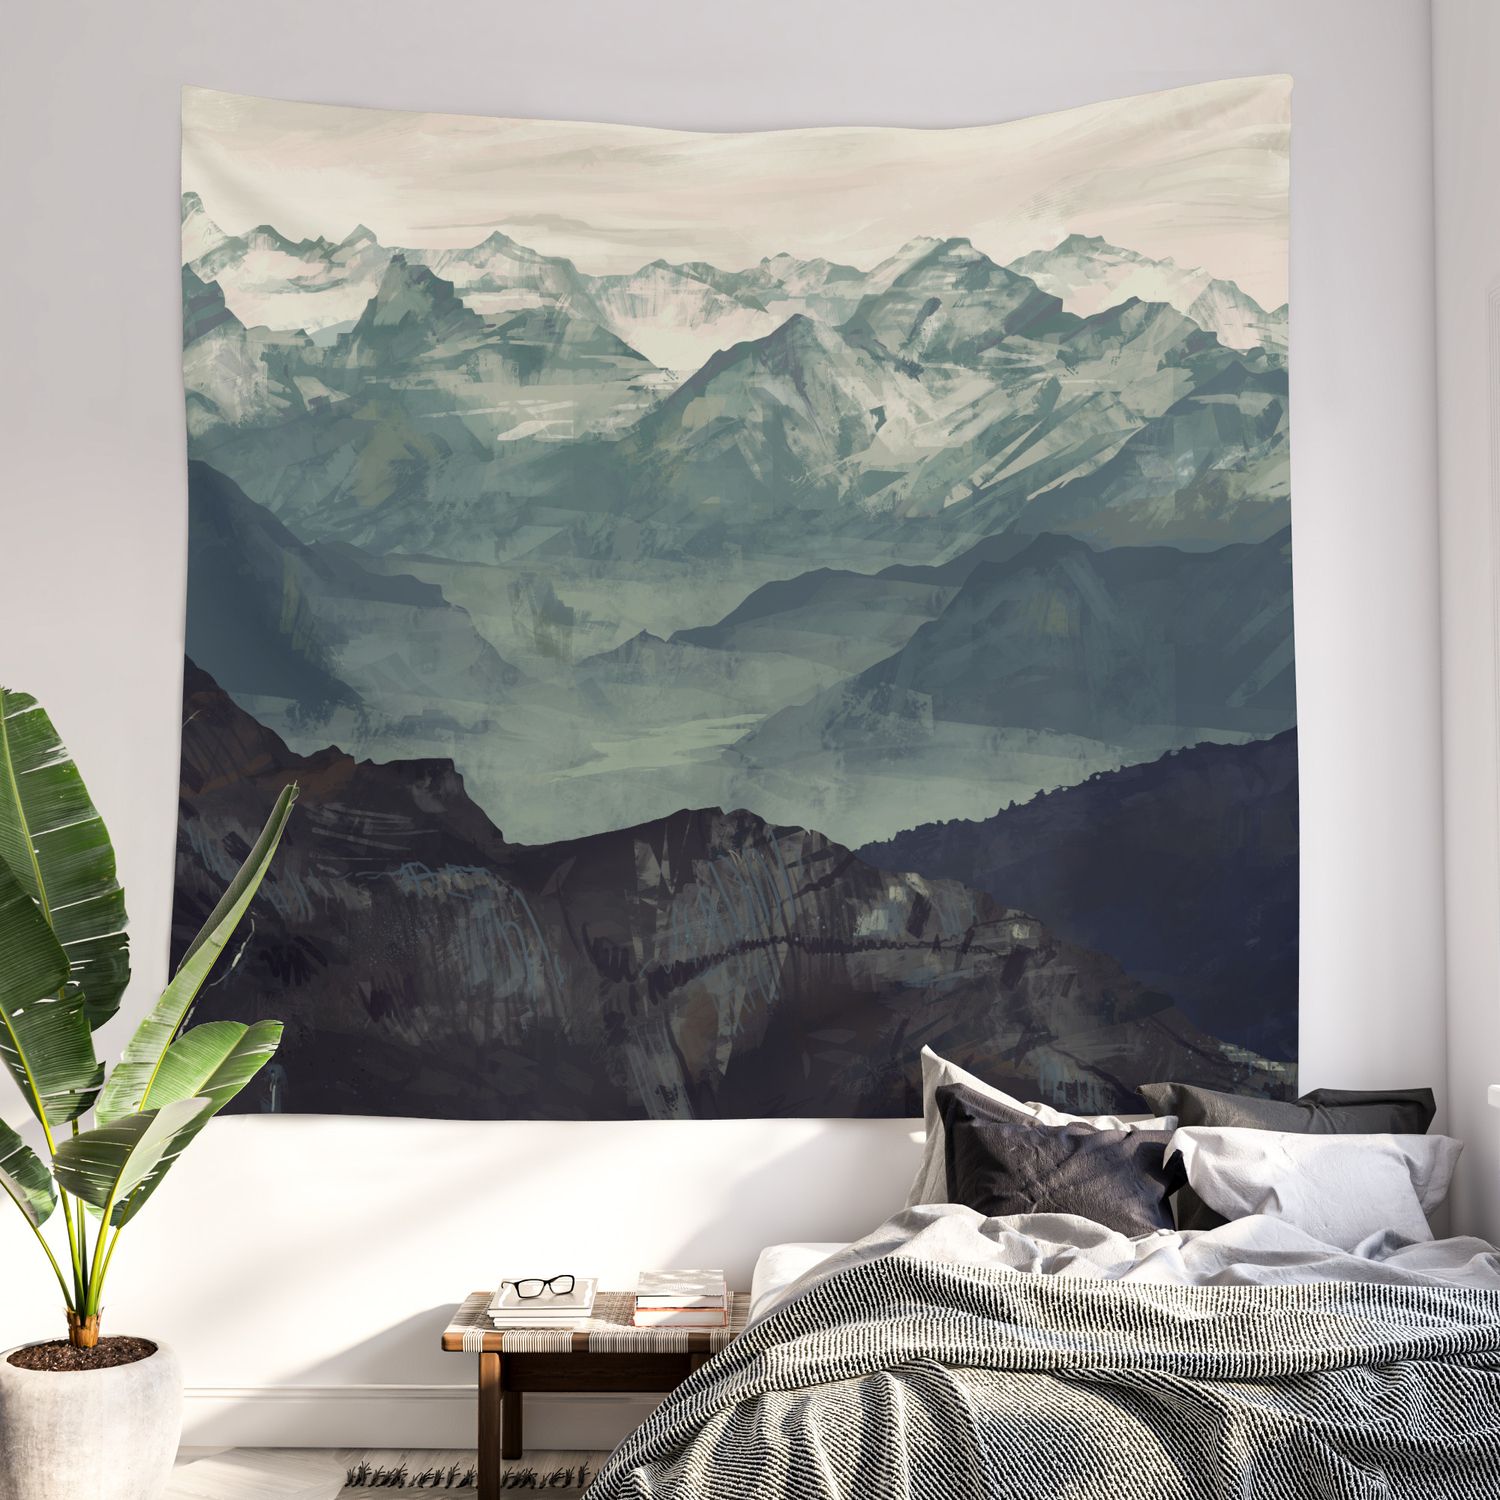 Mountain Fog Wall Tapestrymicaela Dawn | Society6 Pertaining To Most Recently Released Mountains In The Fog Wall Art (View 16 of 20)